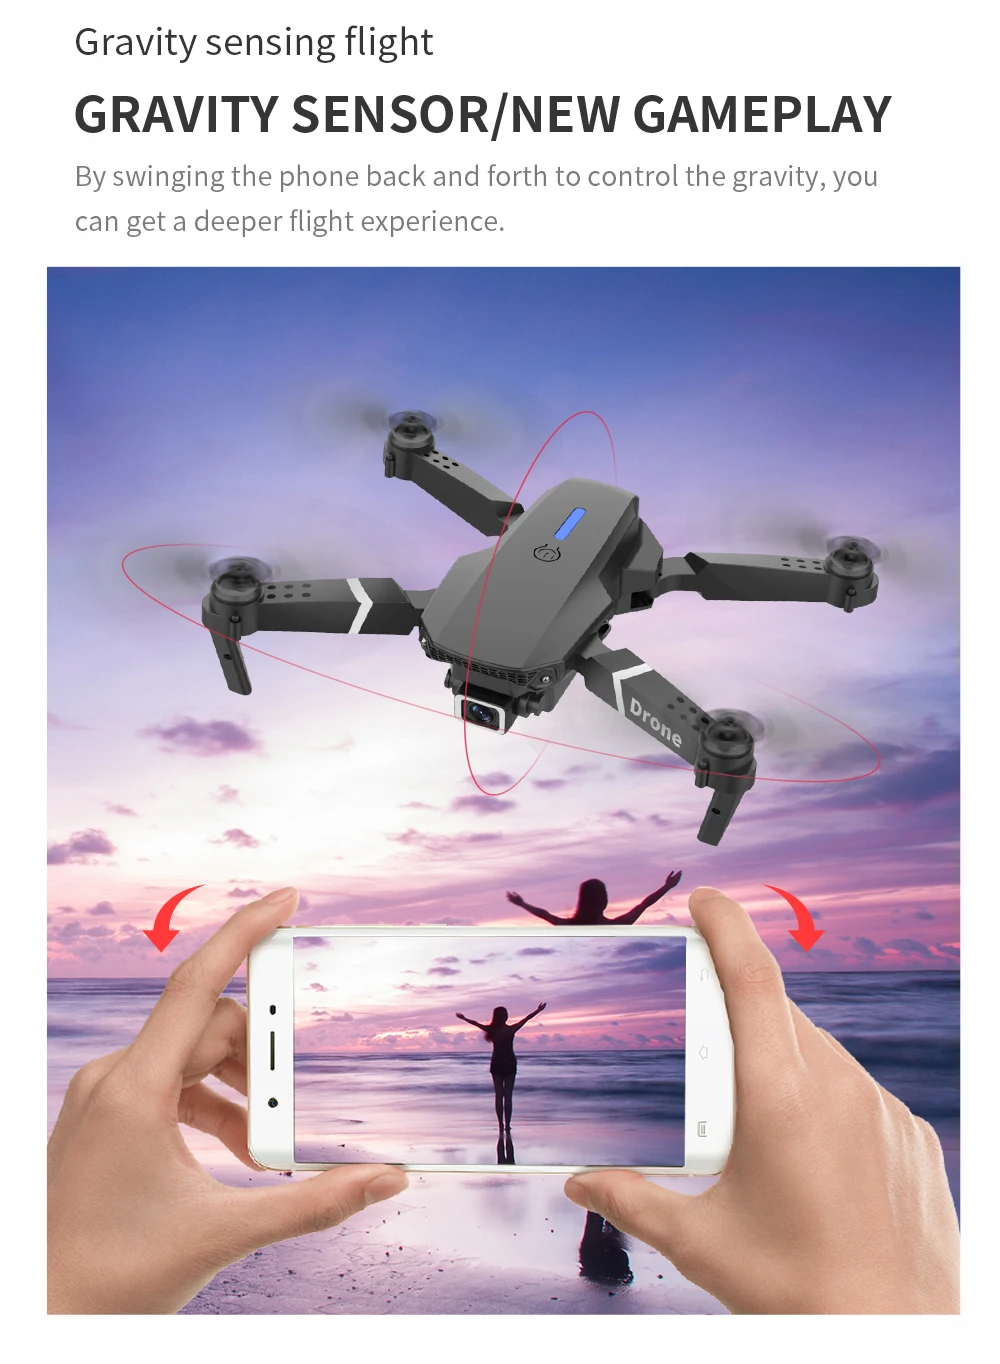 S5378faae71e54831841b4b18f6201ce8Y Professional Drone E88 4k wide-angle HD camera WiFi fpv height Hold Foldable RC quadrotor helicopter Camera-free children's toys